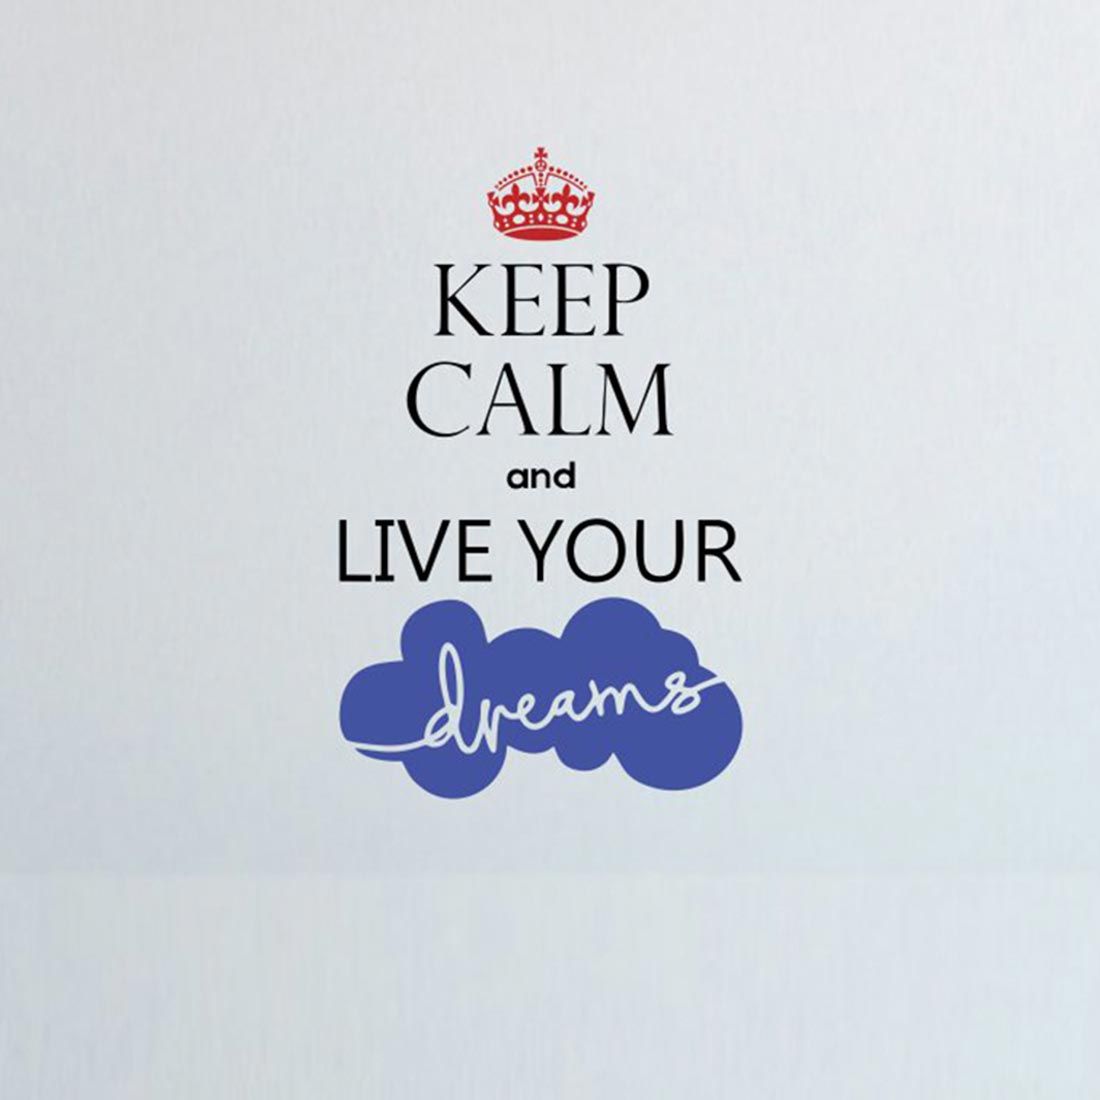 Keep Calm Quotes Live Your Dreams - Wall Stickers & Decals by ...